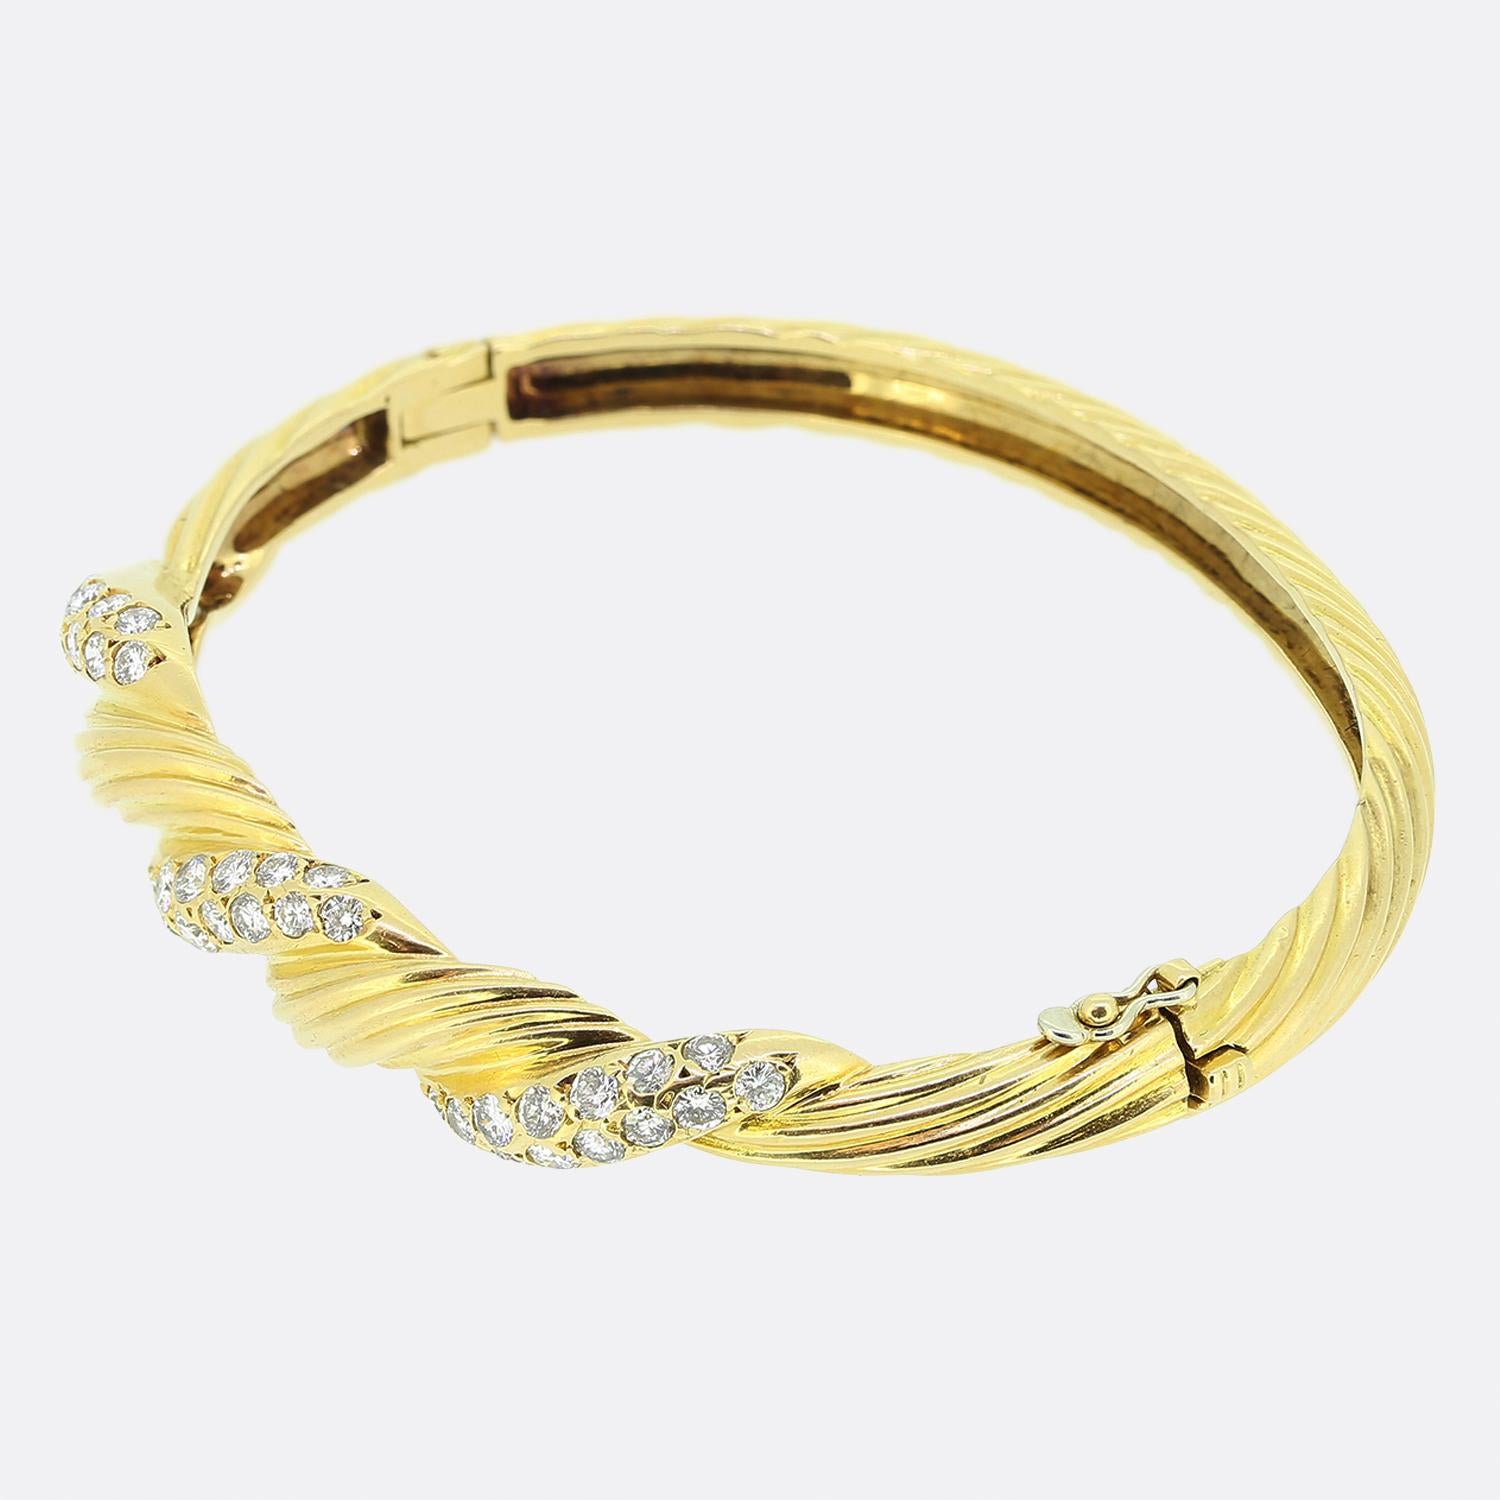 Here we have a wonderful diamond bracelet from the world renowned jewellery designer Van Cleef and Arpels. The bangle features 1.50 carats of perfectly matched round brilliant cut diamonds that are set in a twisted design. The bangle is marked VCA